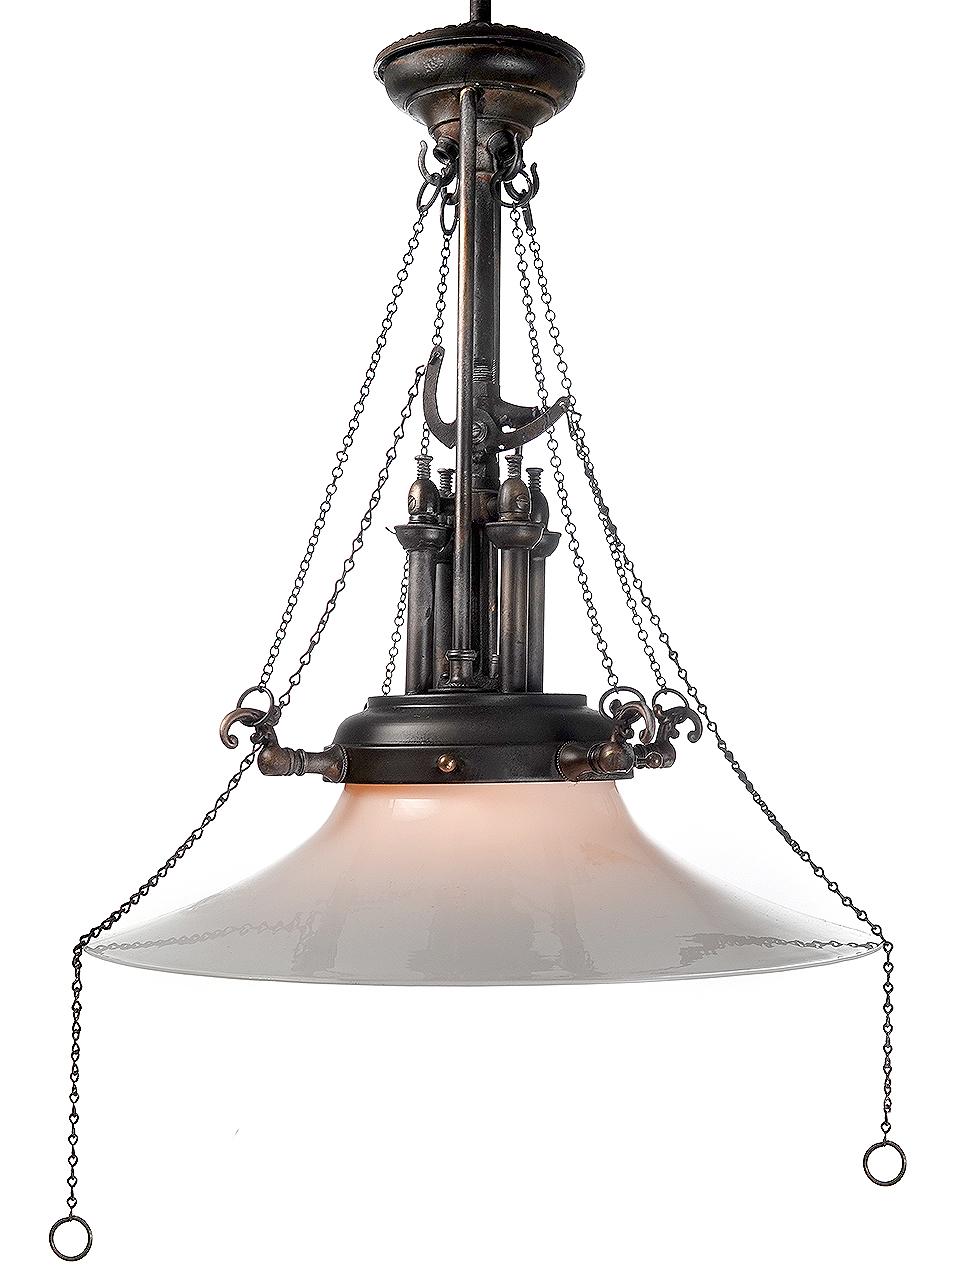 19th Century Very Early Impressive, Unique And Complex Gas Lamp - Matching Pair For Sale